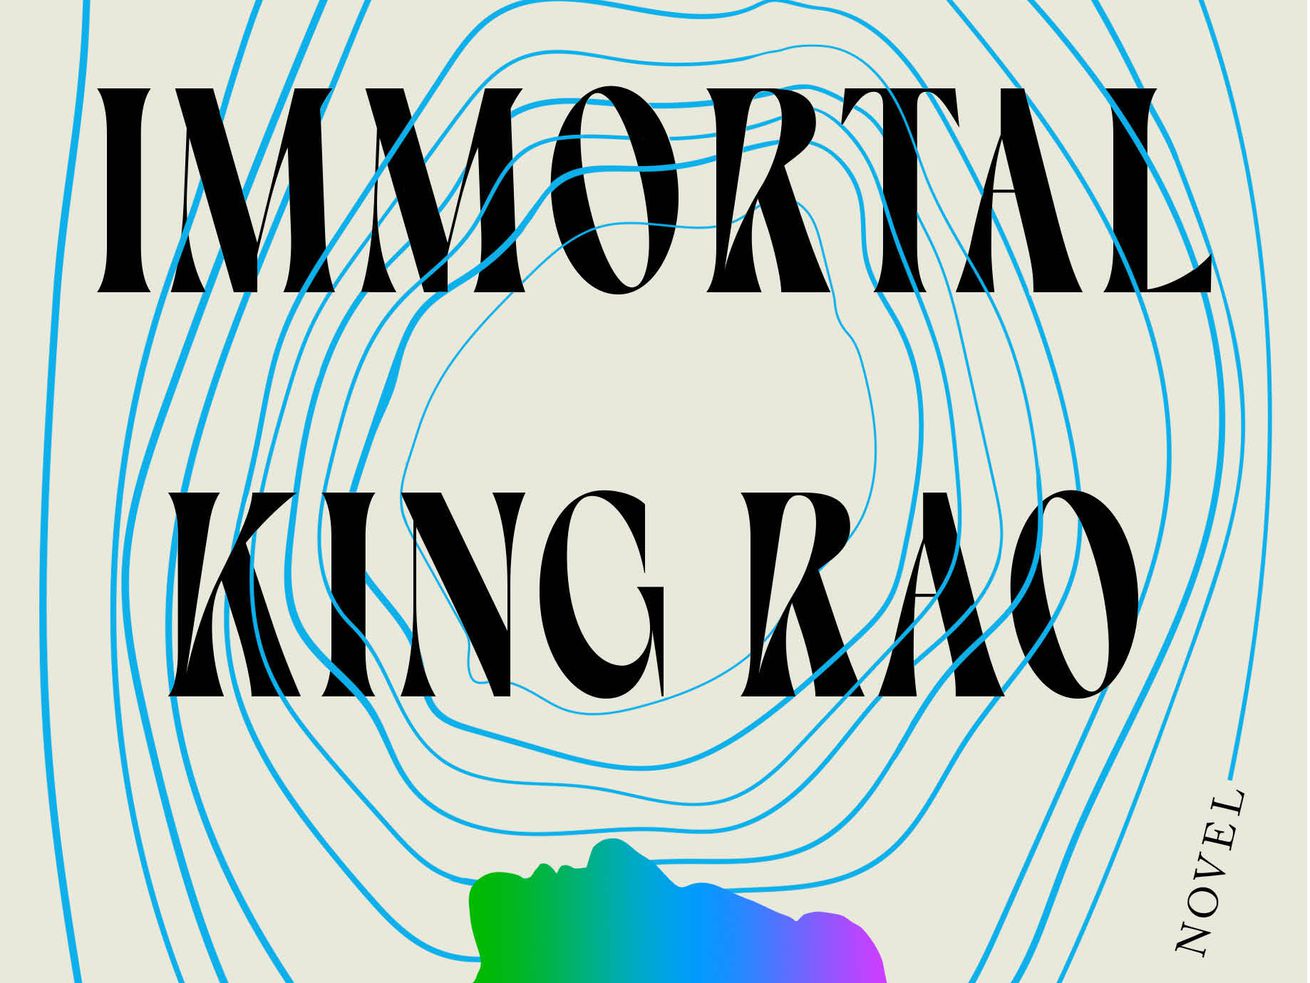 In The Immortal King Rao, a tech billionaire becomes king of the world